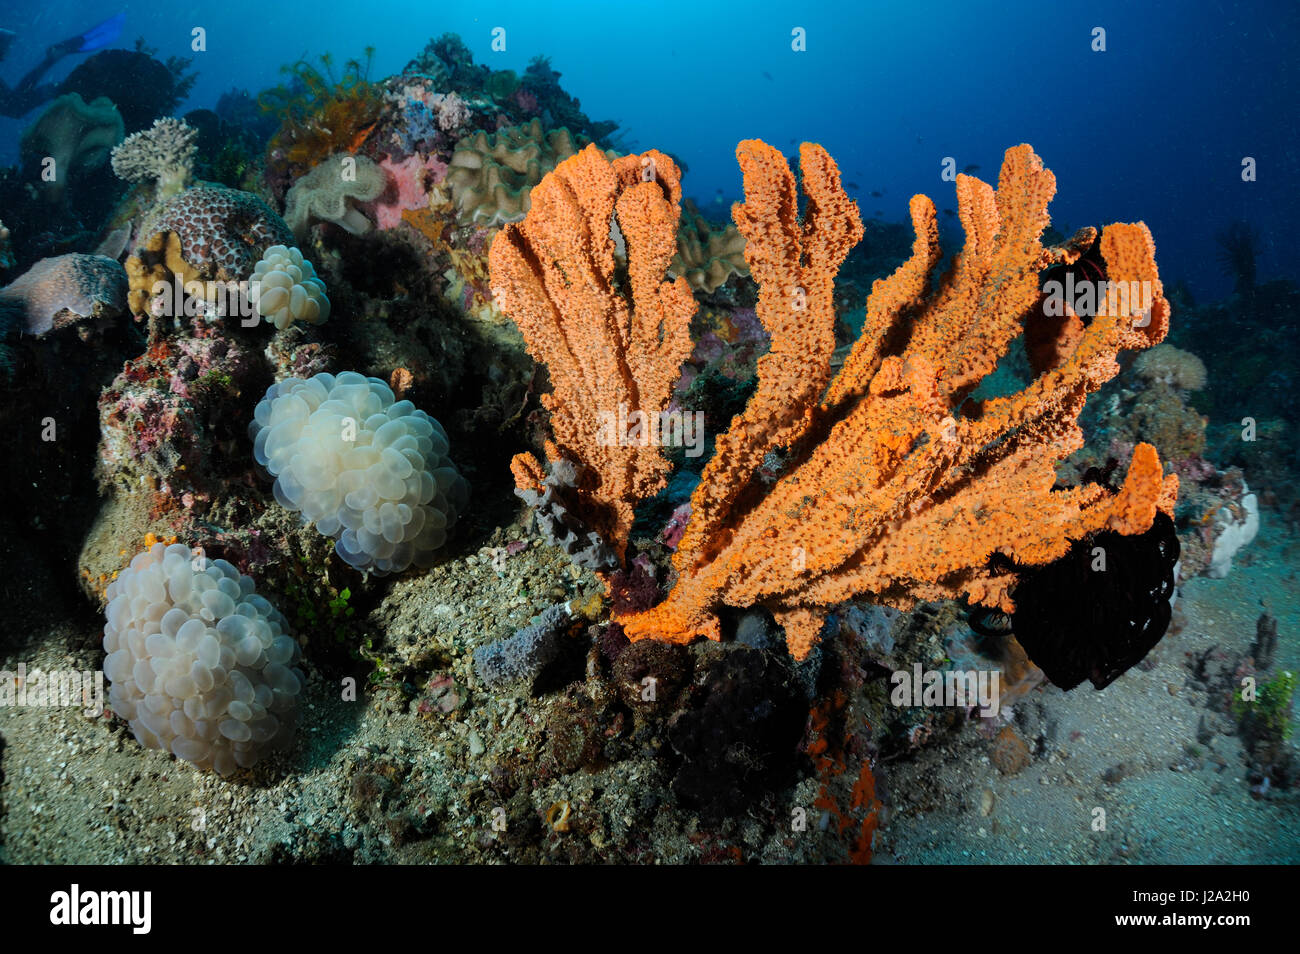 Sponges at the coral reef in the Lembeh Strait Stock Photo